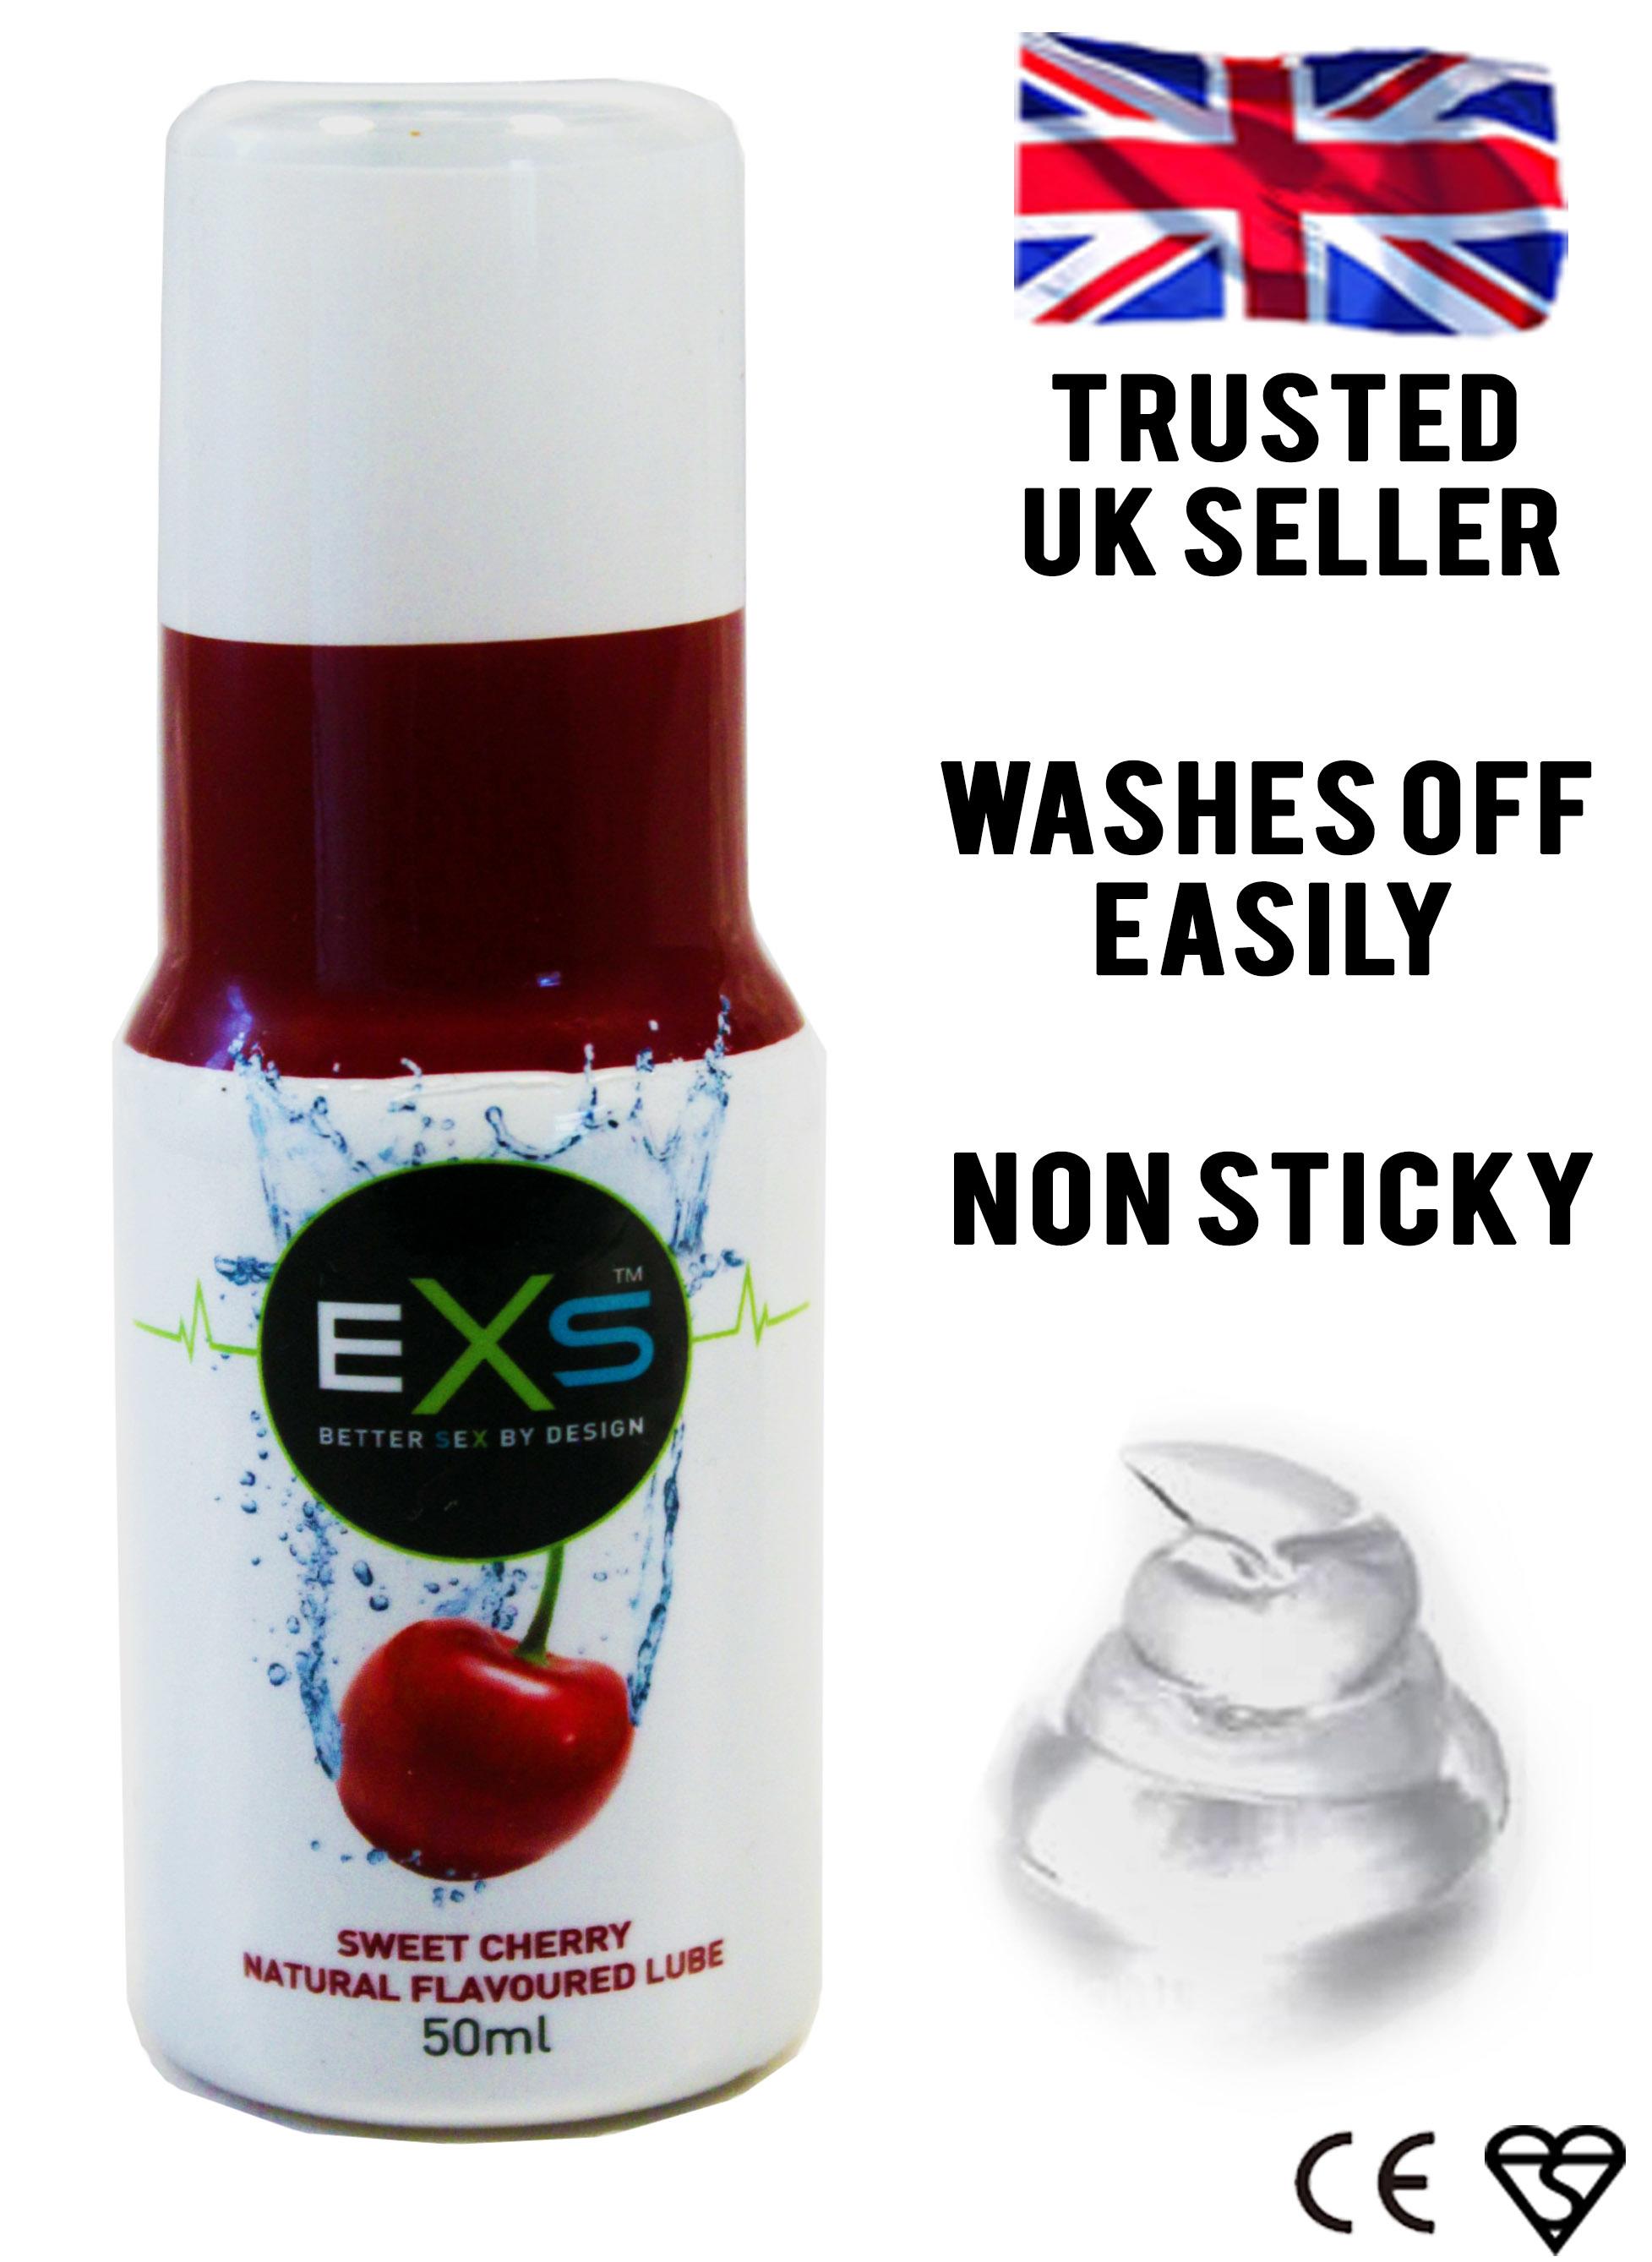 EXS Cherry Lube Bottle 50ml with information